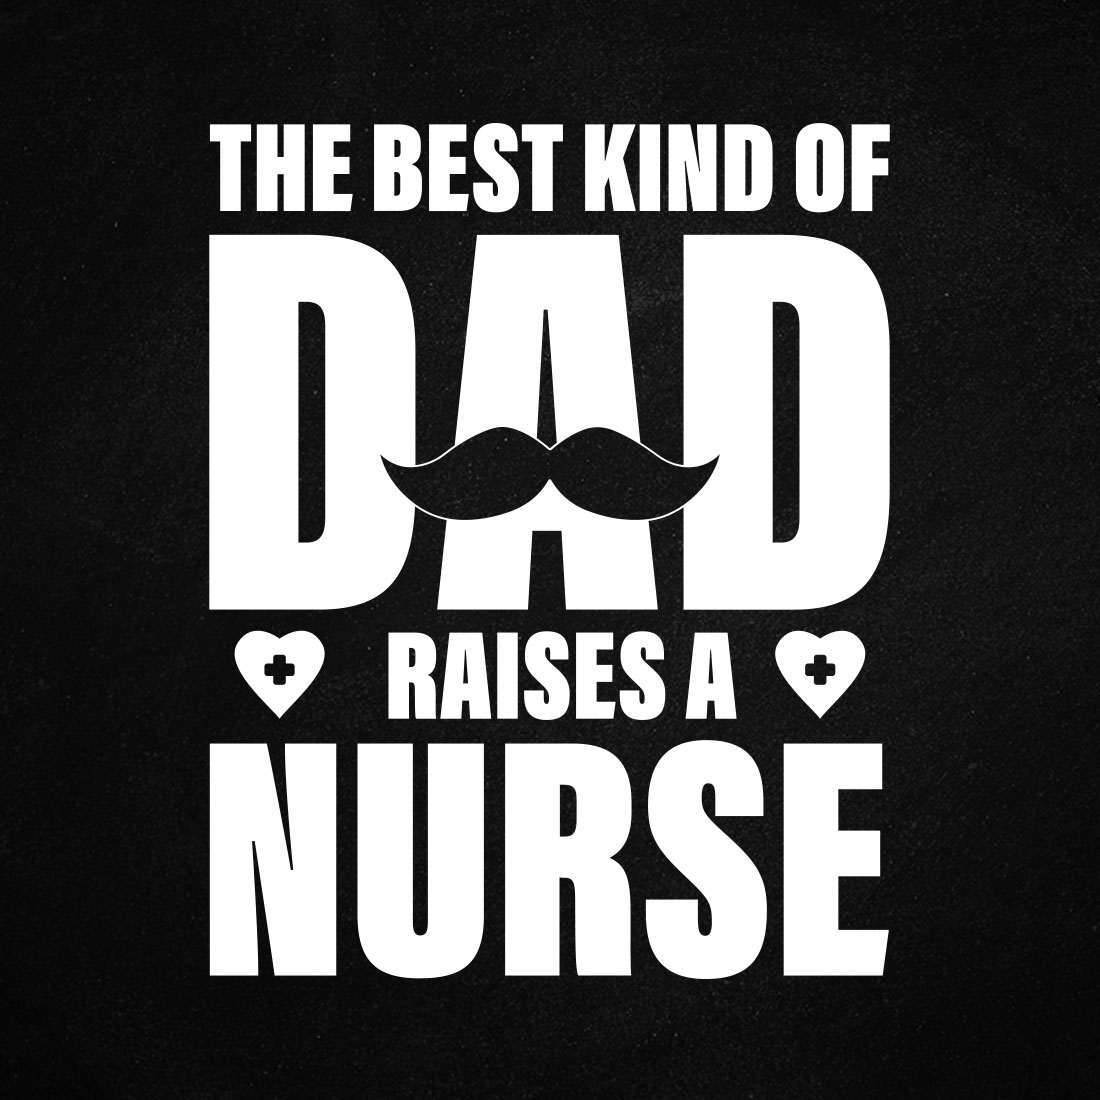 The Best Kind Of Dad Father's Day Nurse Gifts T Shirt Design cover image.